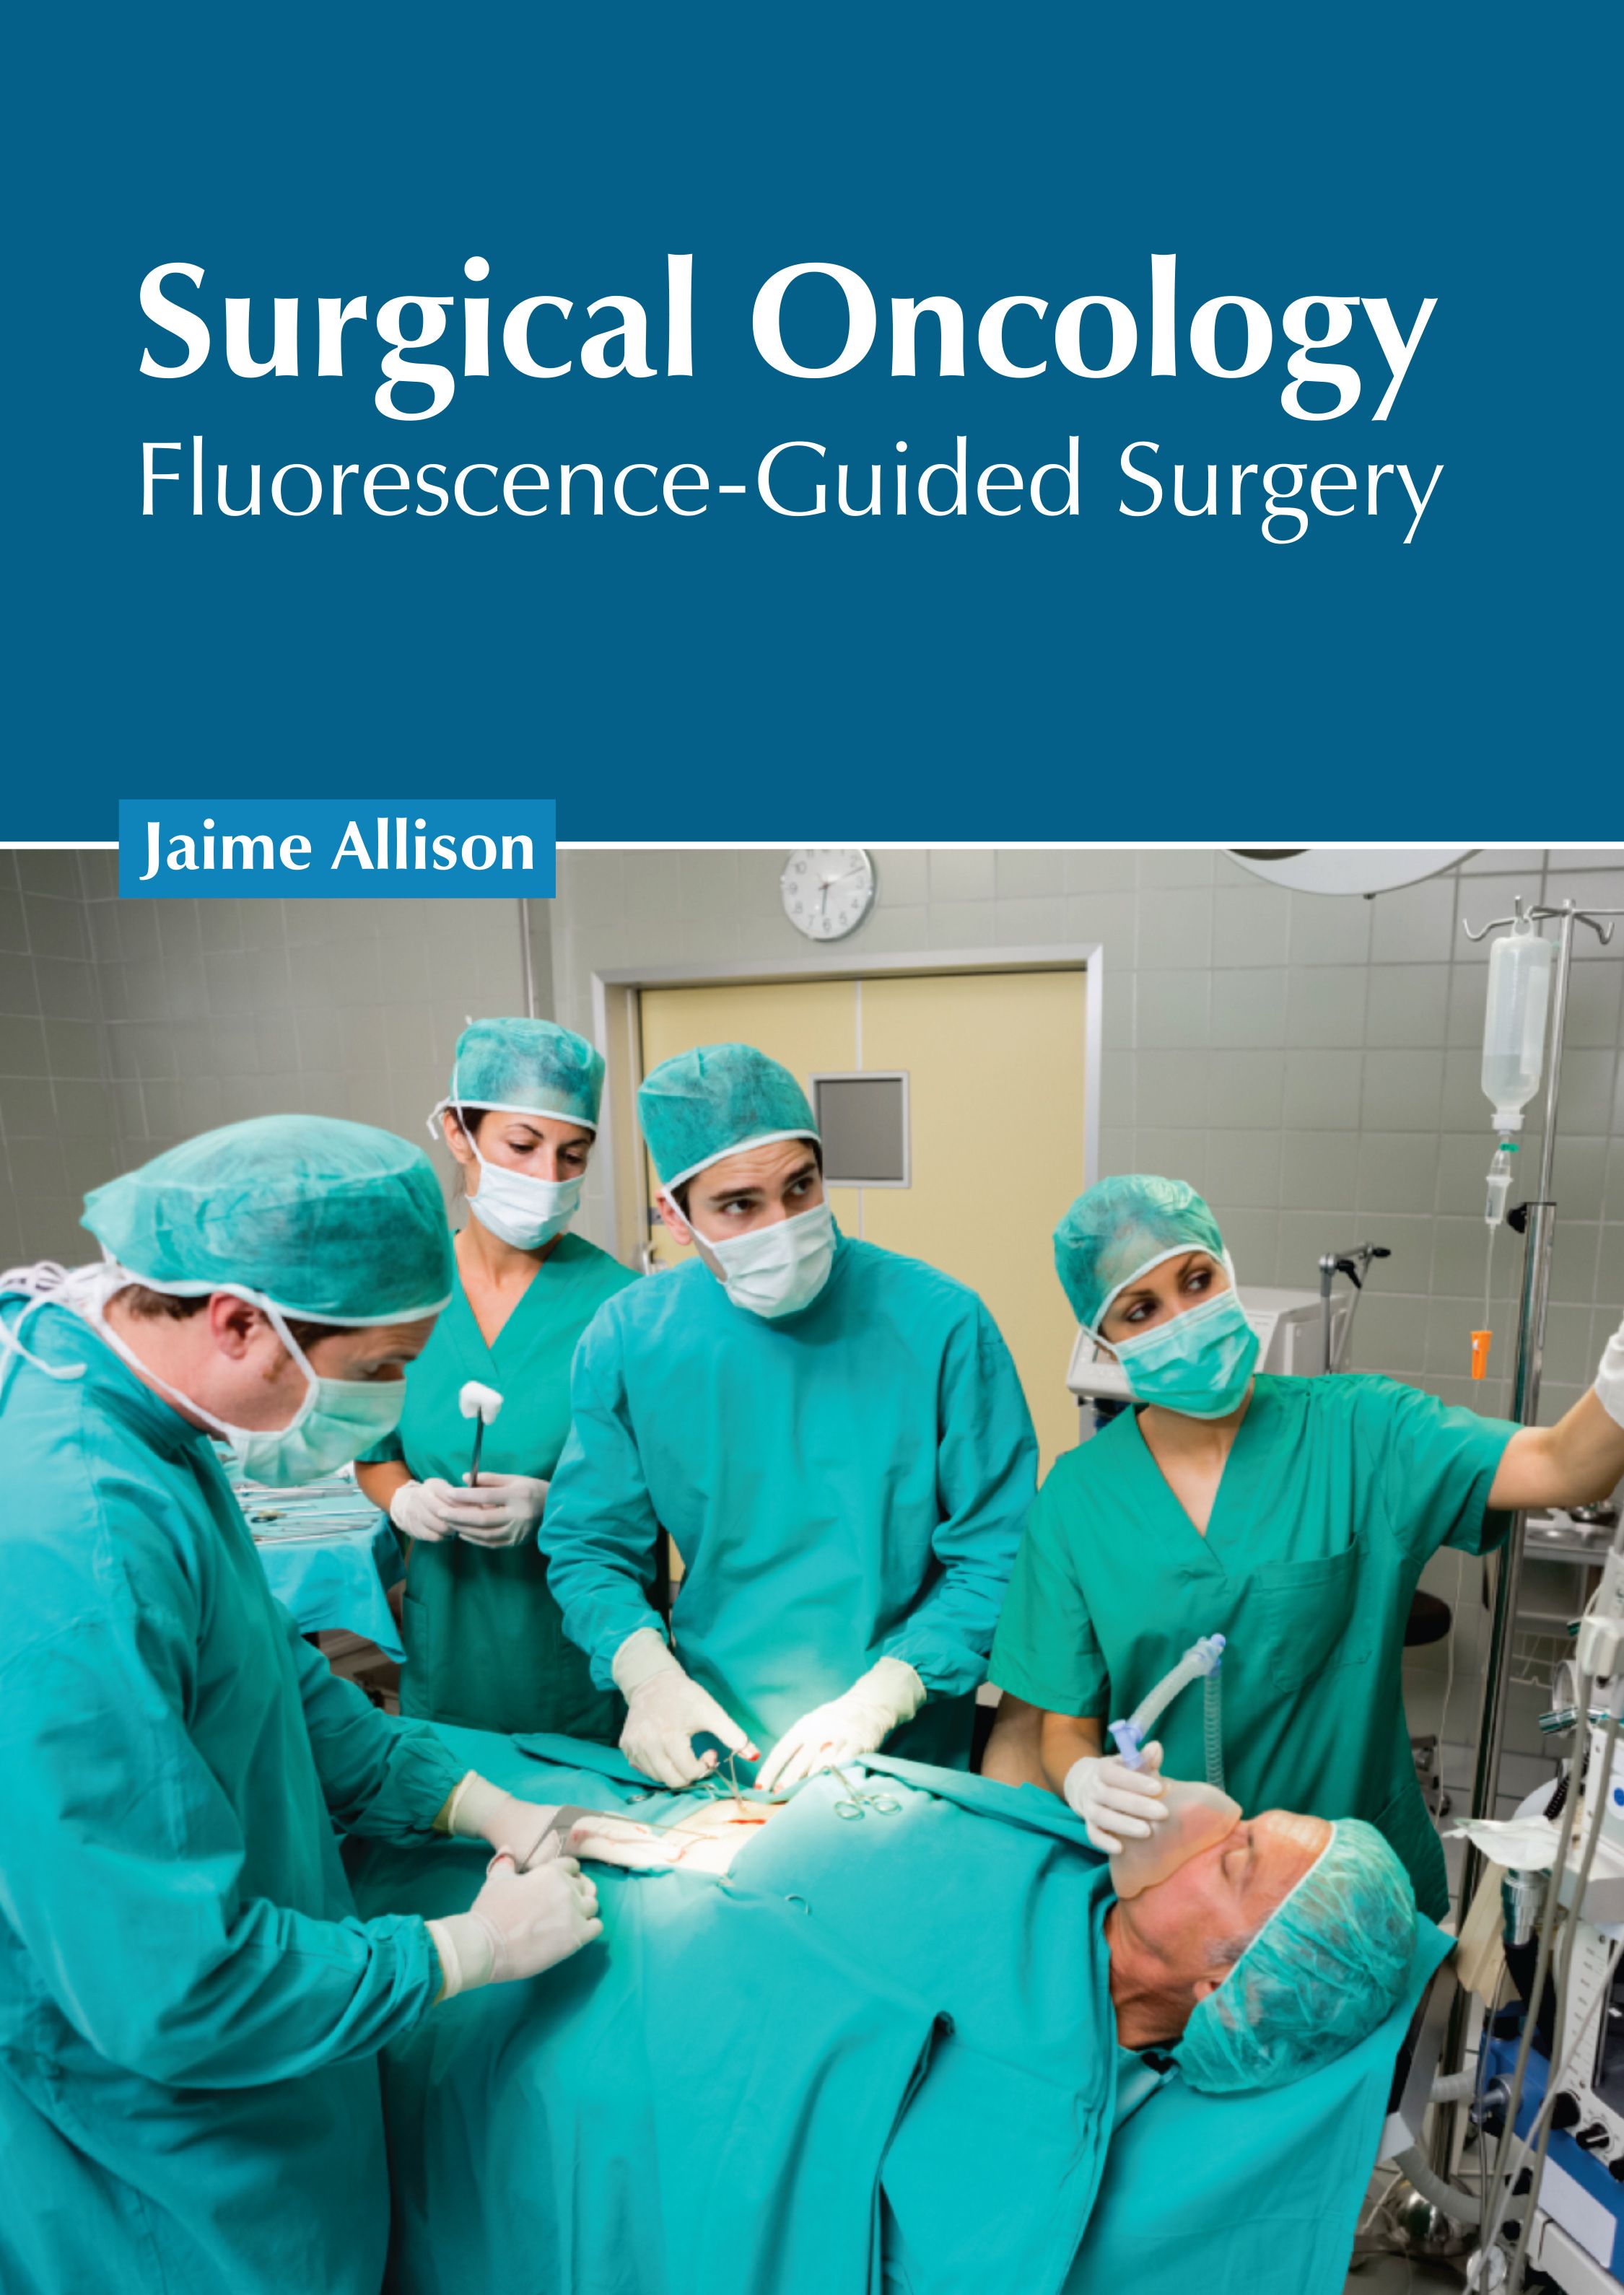 

medical-reference-books/surgery/surgical-oncology-fluorescence-guided-surgery-9798887404806